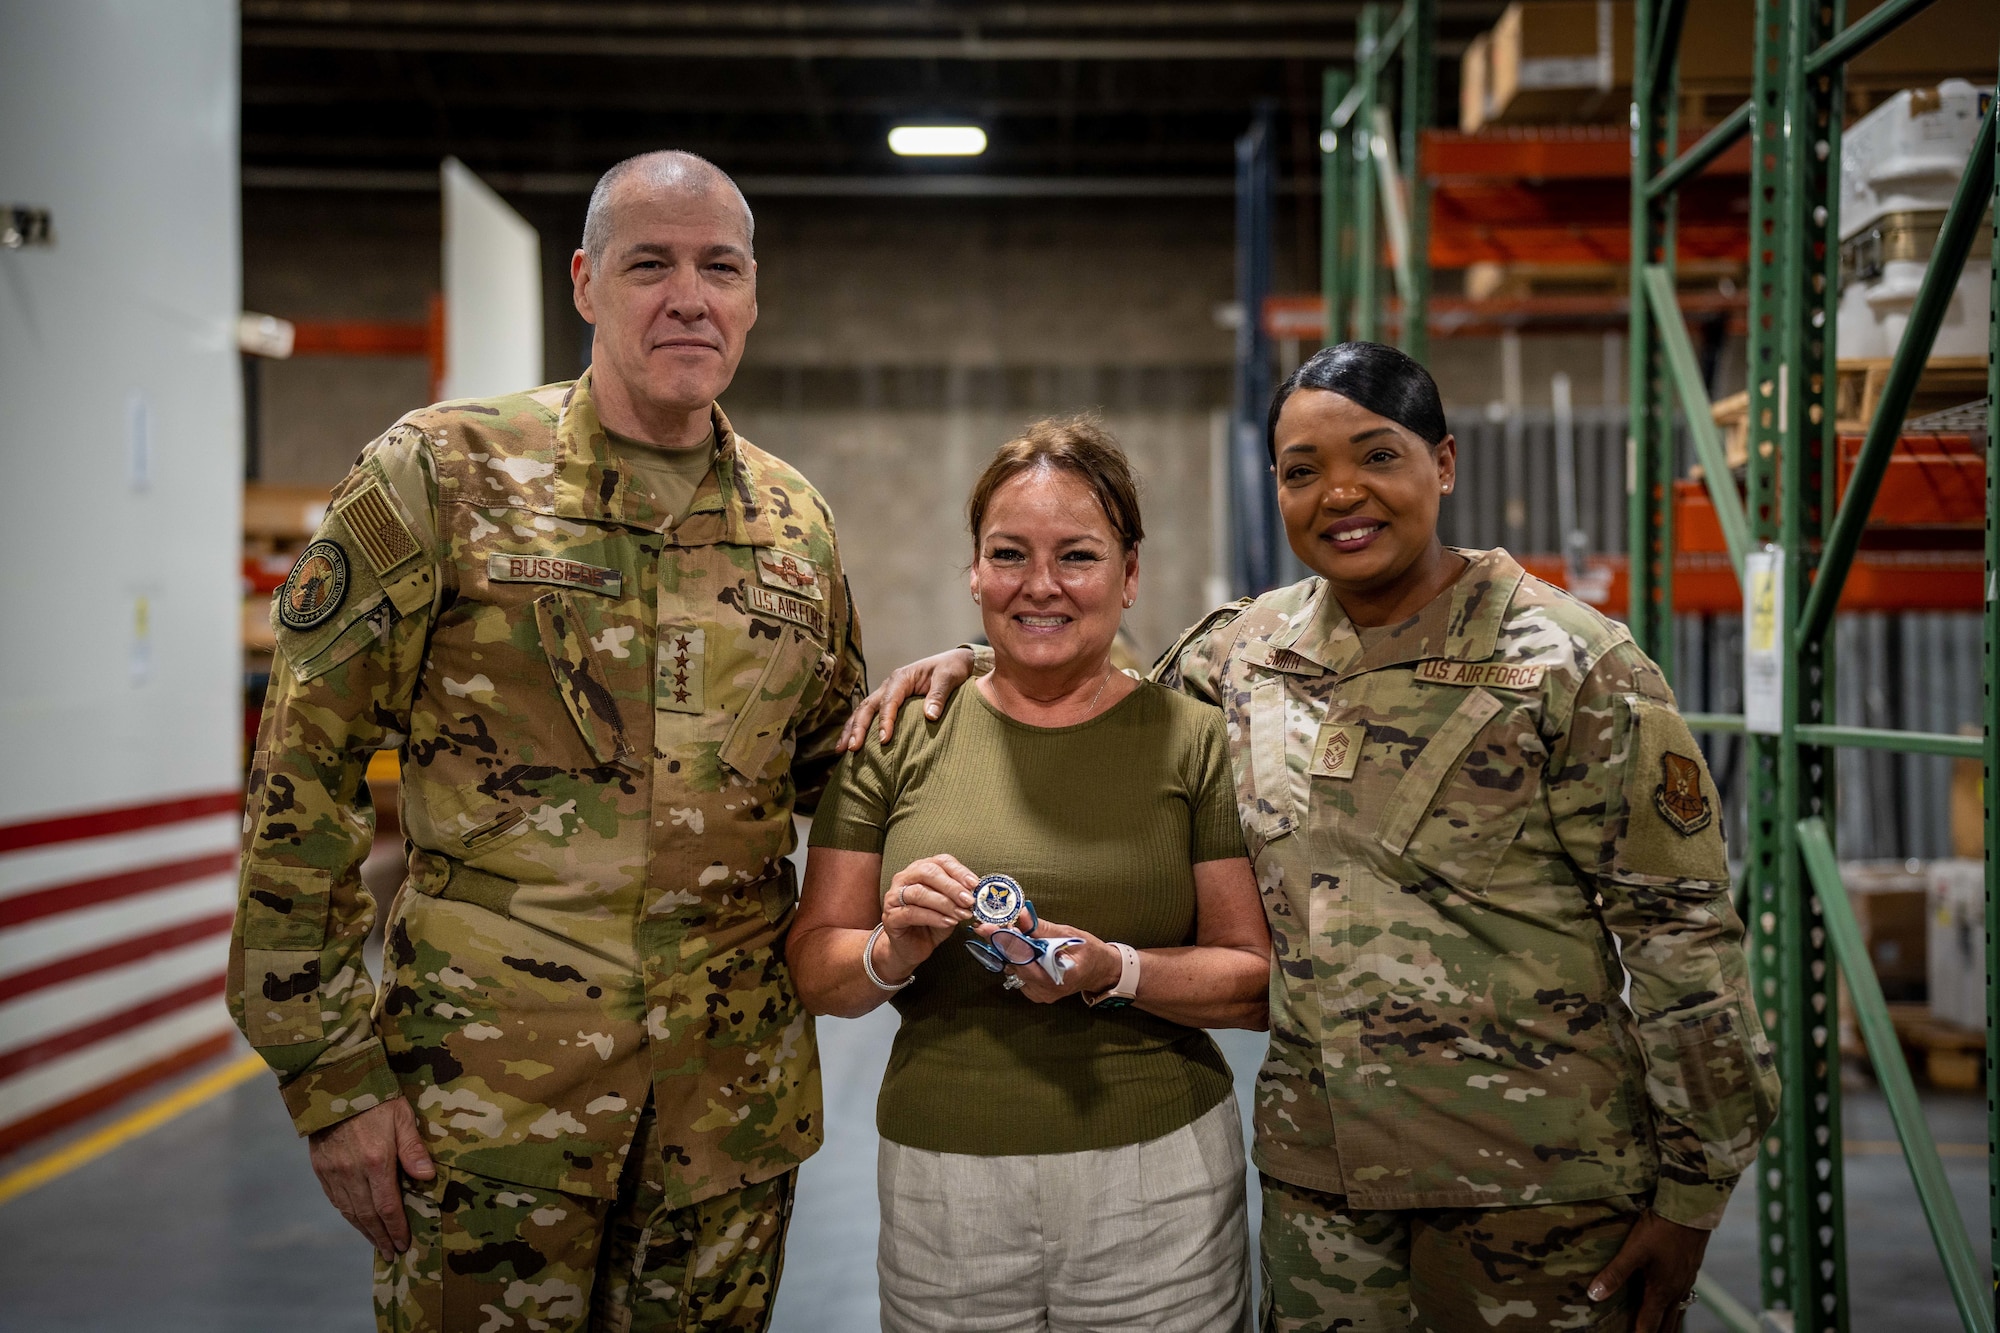 Woman poses with her challenge coin for a group photo with man and woman.